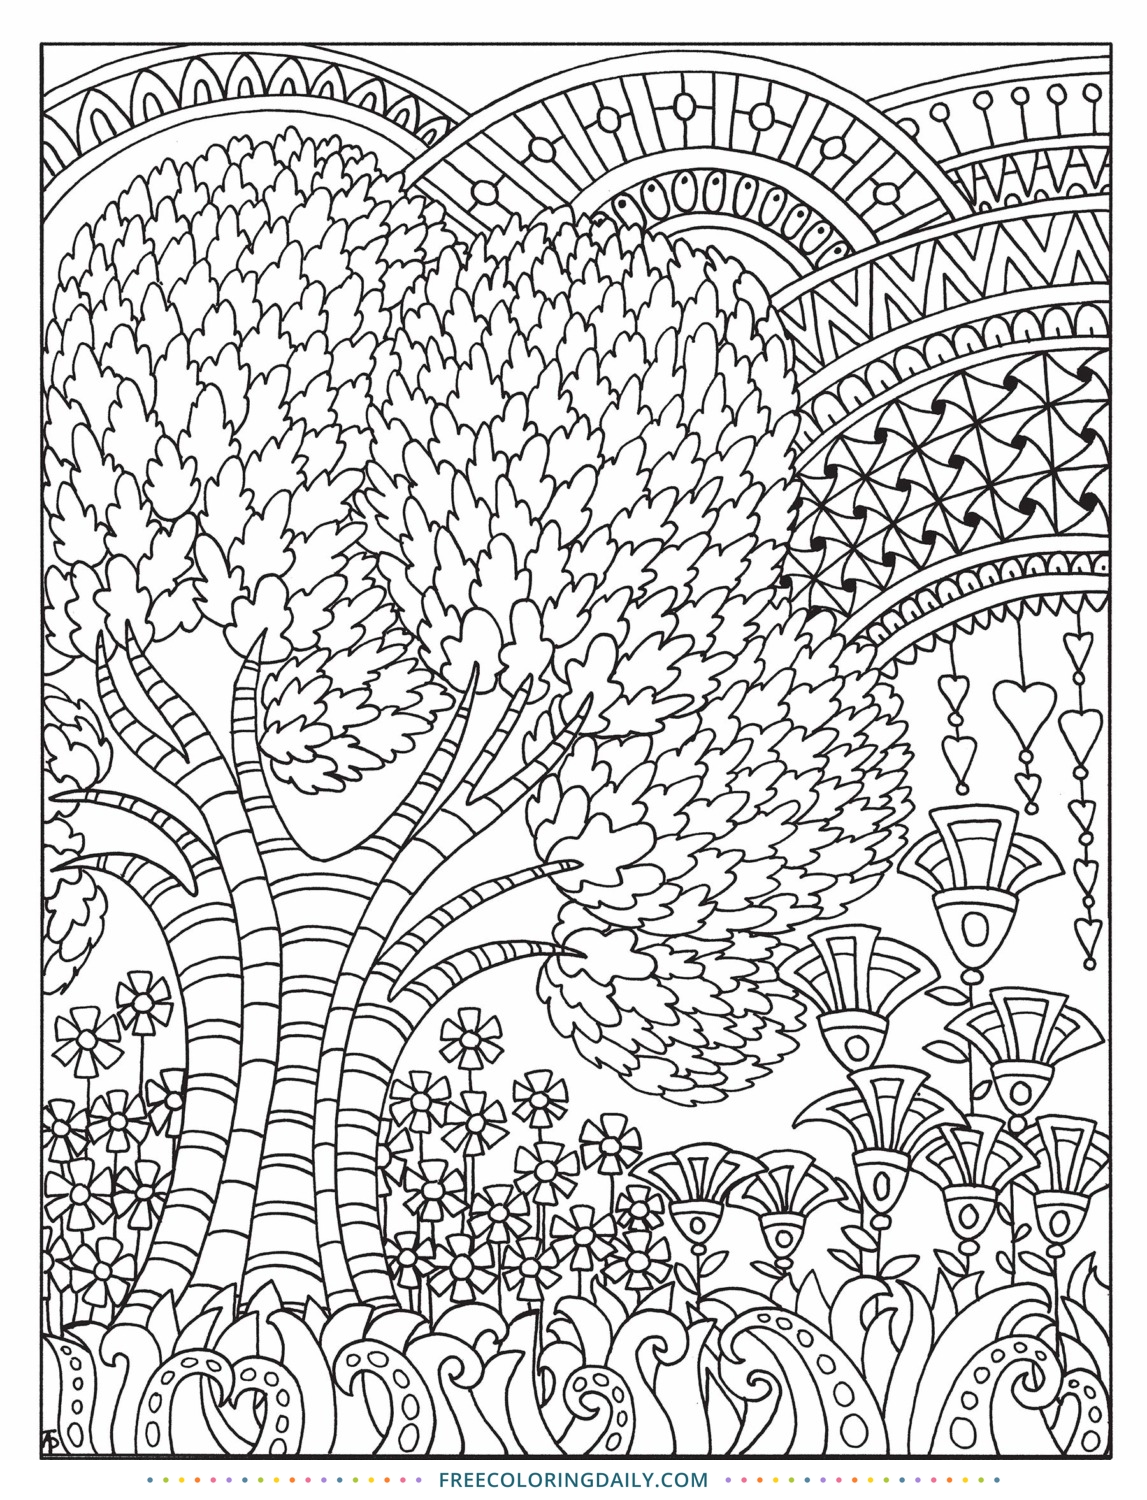 Free Outdoor Pattern Coloring | Free Coloring Daily